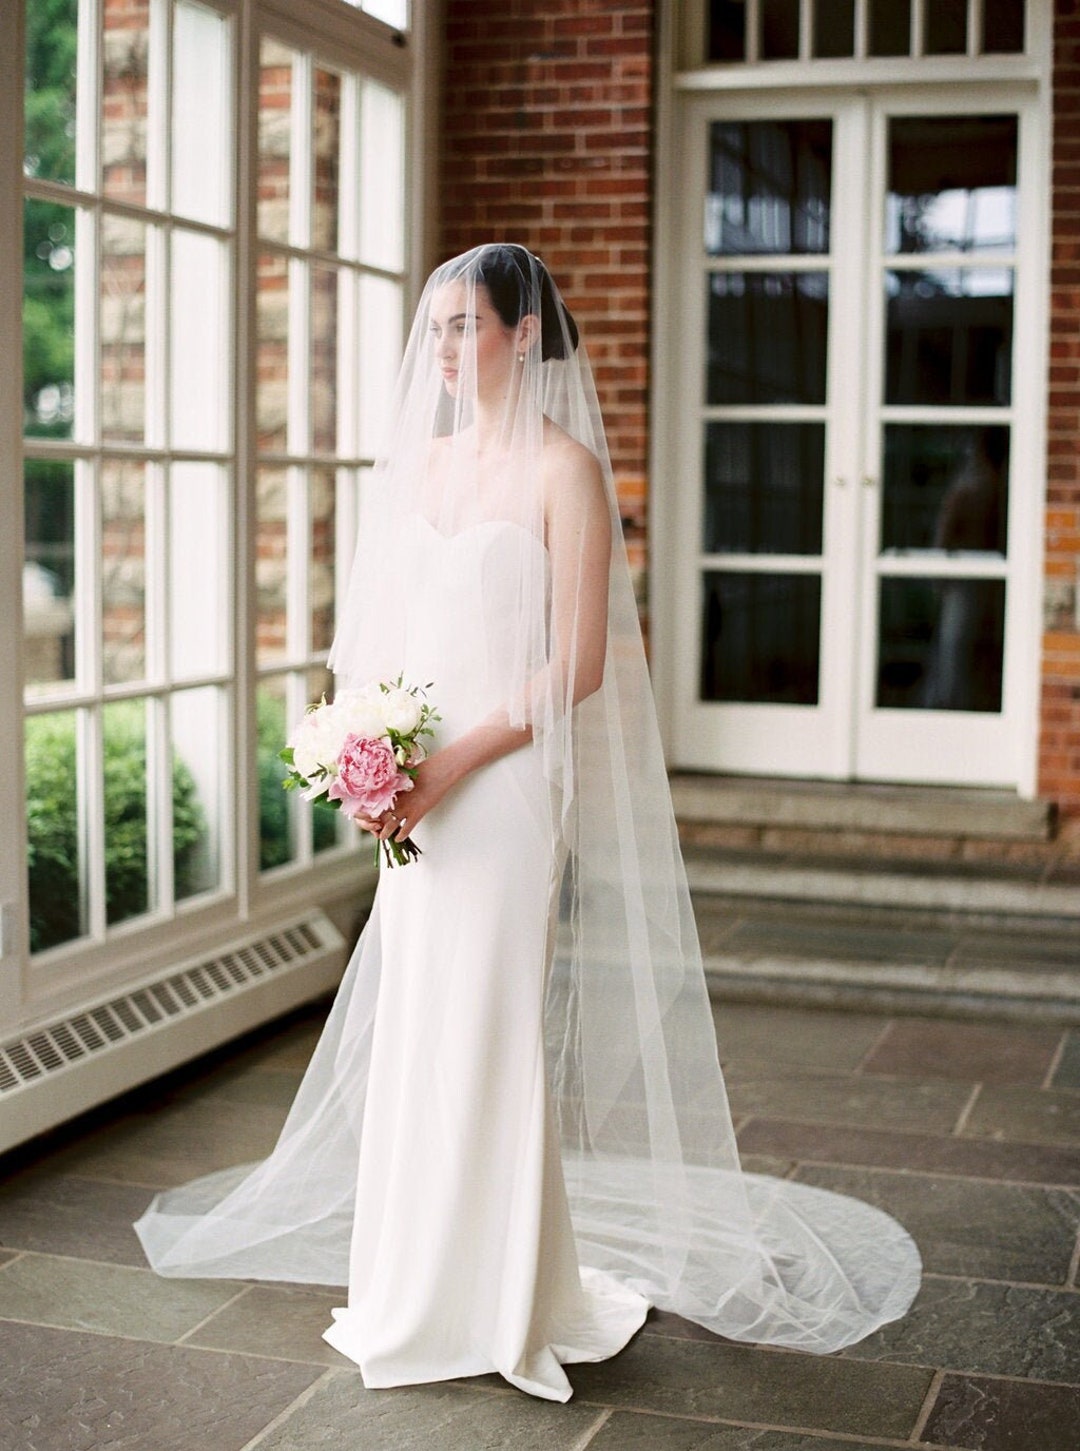 One Blushing Bride Two Tier Drop Wedding Veil, Long Veil with Blusher, Double Layer Ivory / Fingertip 35-40 Inches